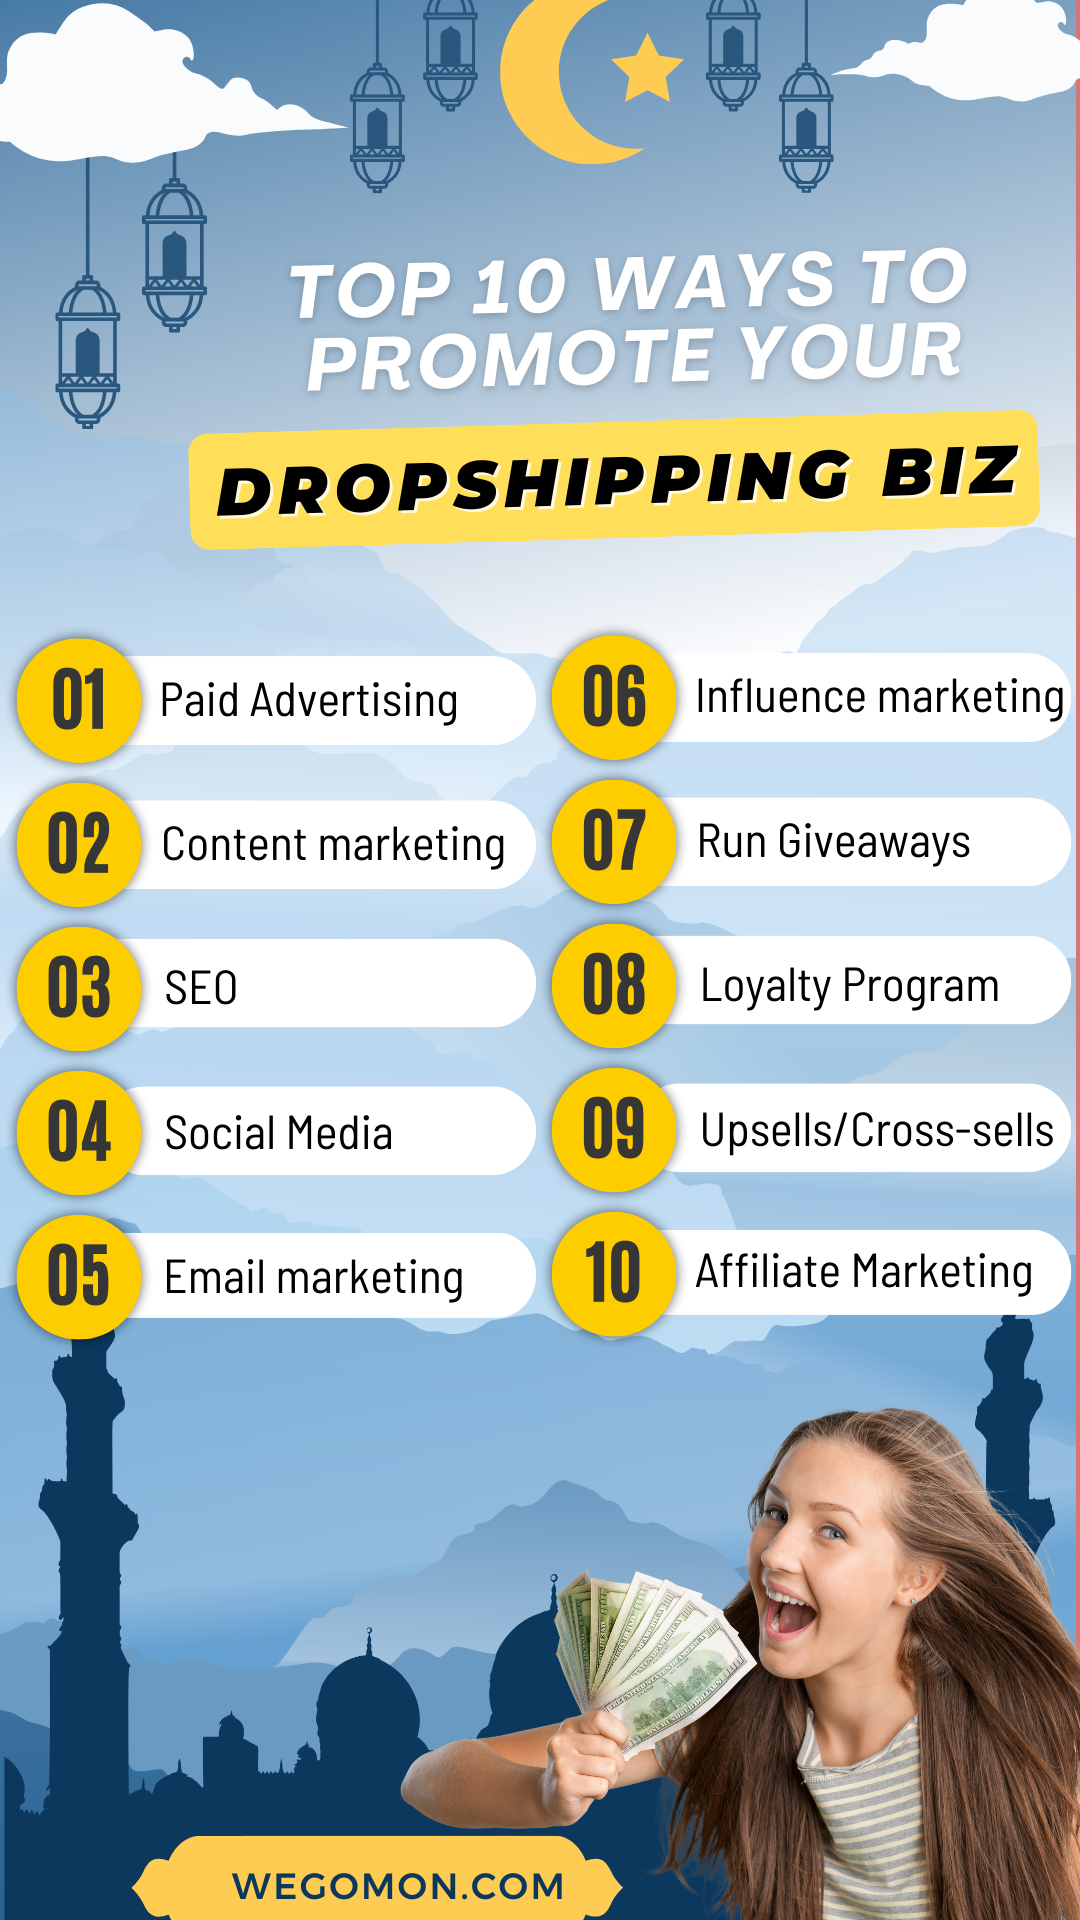 Top 10 ways to promote your dropshipping business